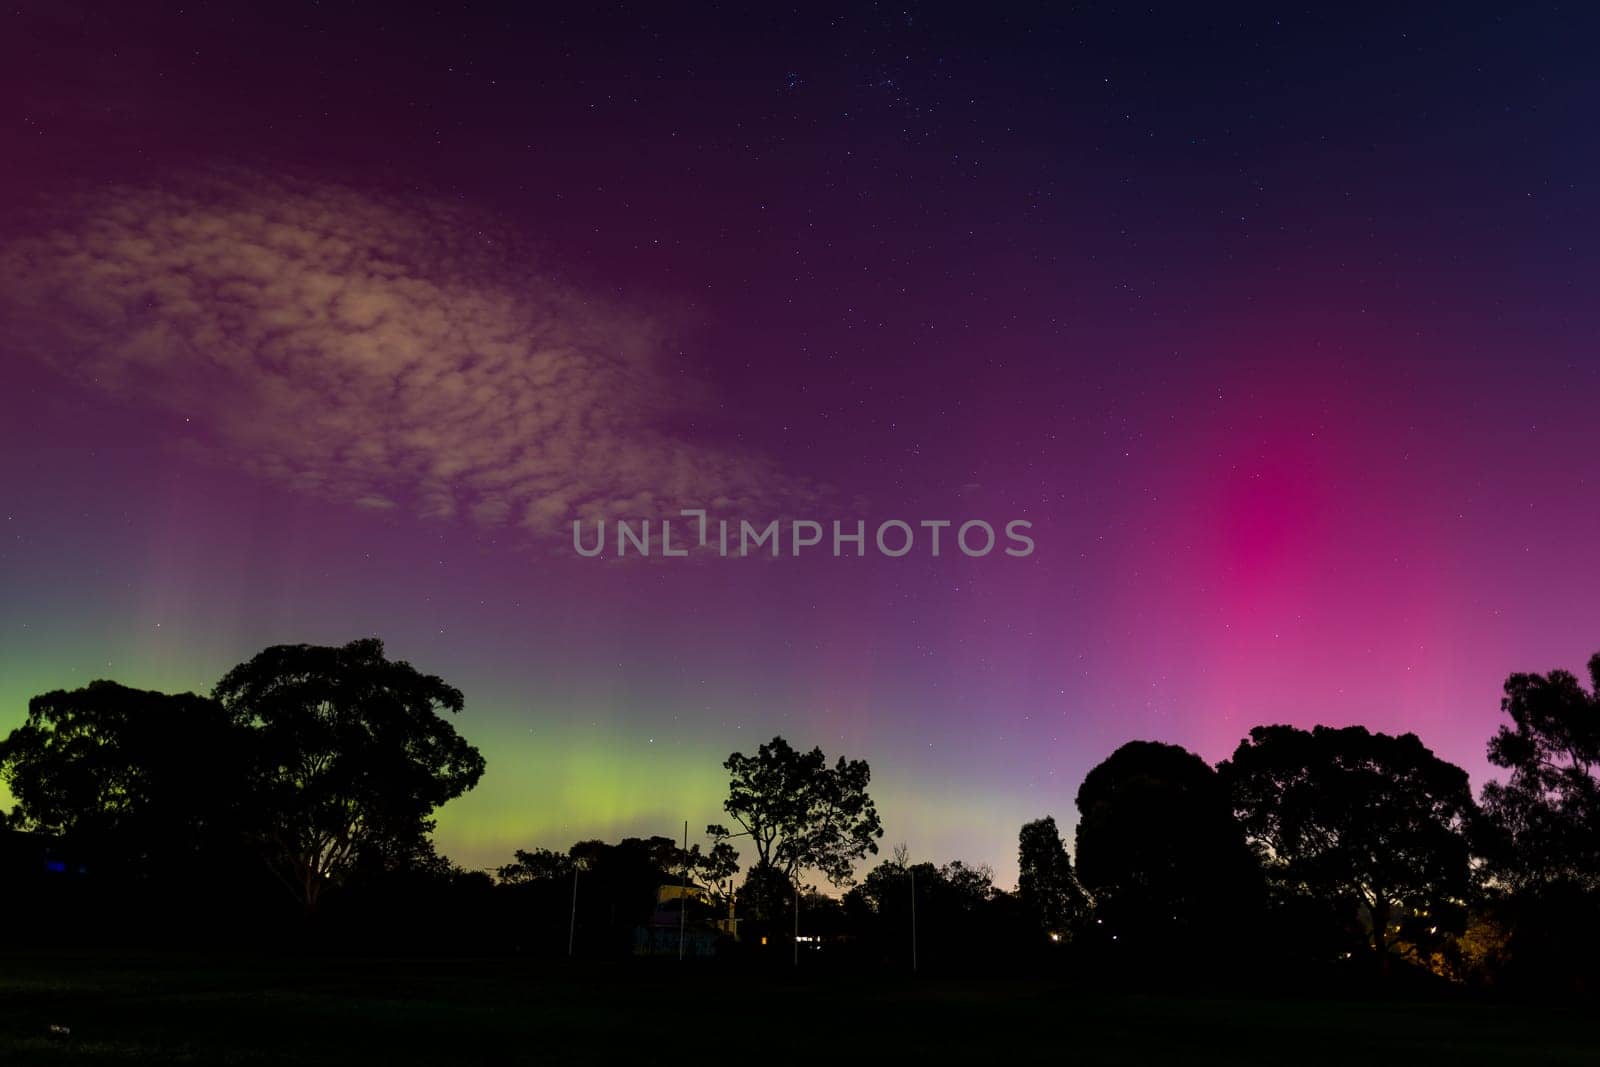 MELBOURNE, AUSTRALIA - MAY 12: Increased solar activity results in the rare Aurora Australis being visible in southerly areas of Australia. This image taken from Macleod in suburban Melbourne, Australia on May 12th 2024.